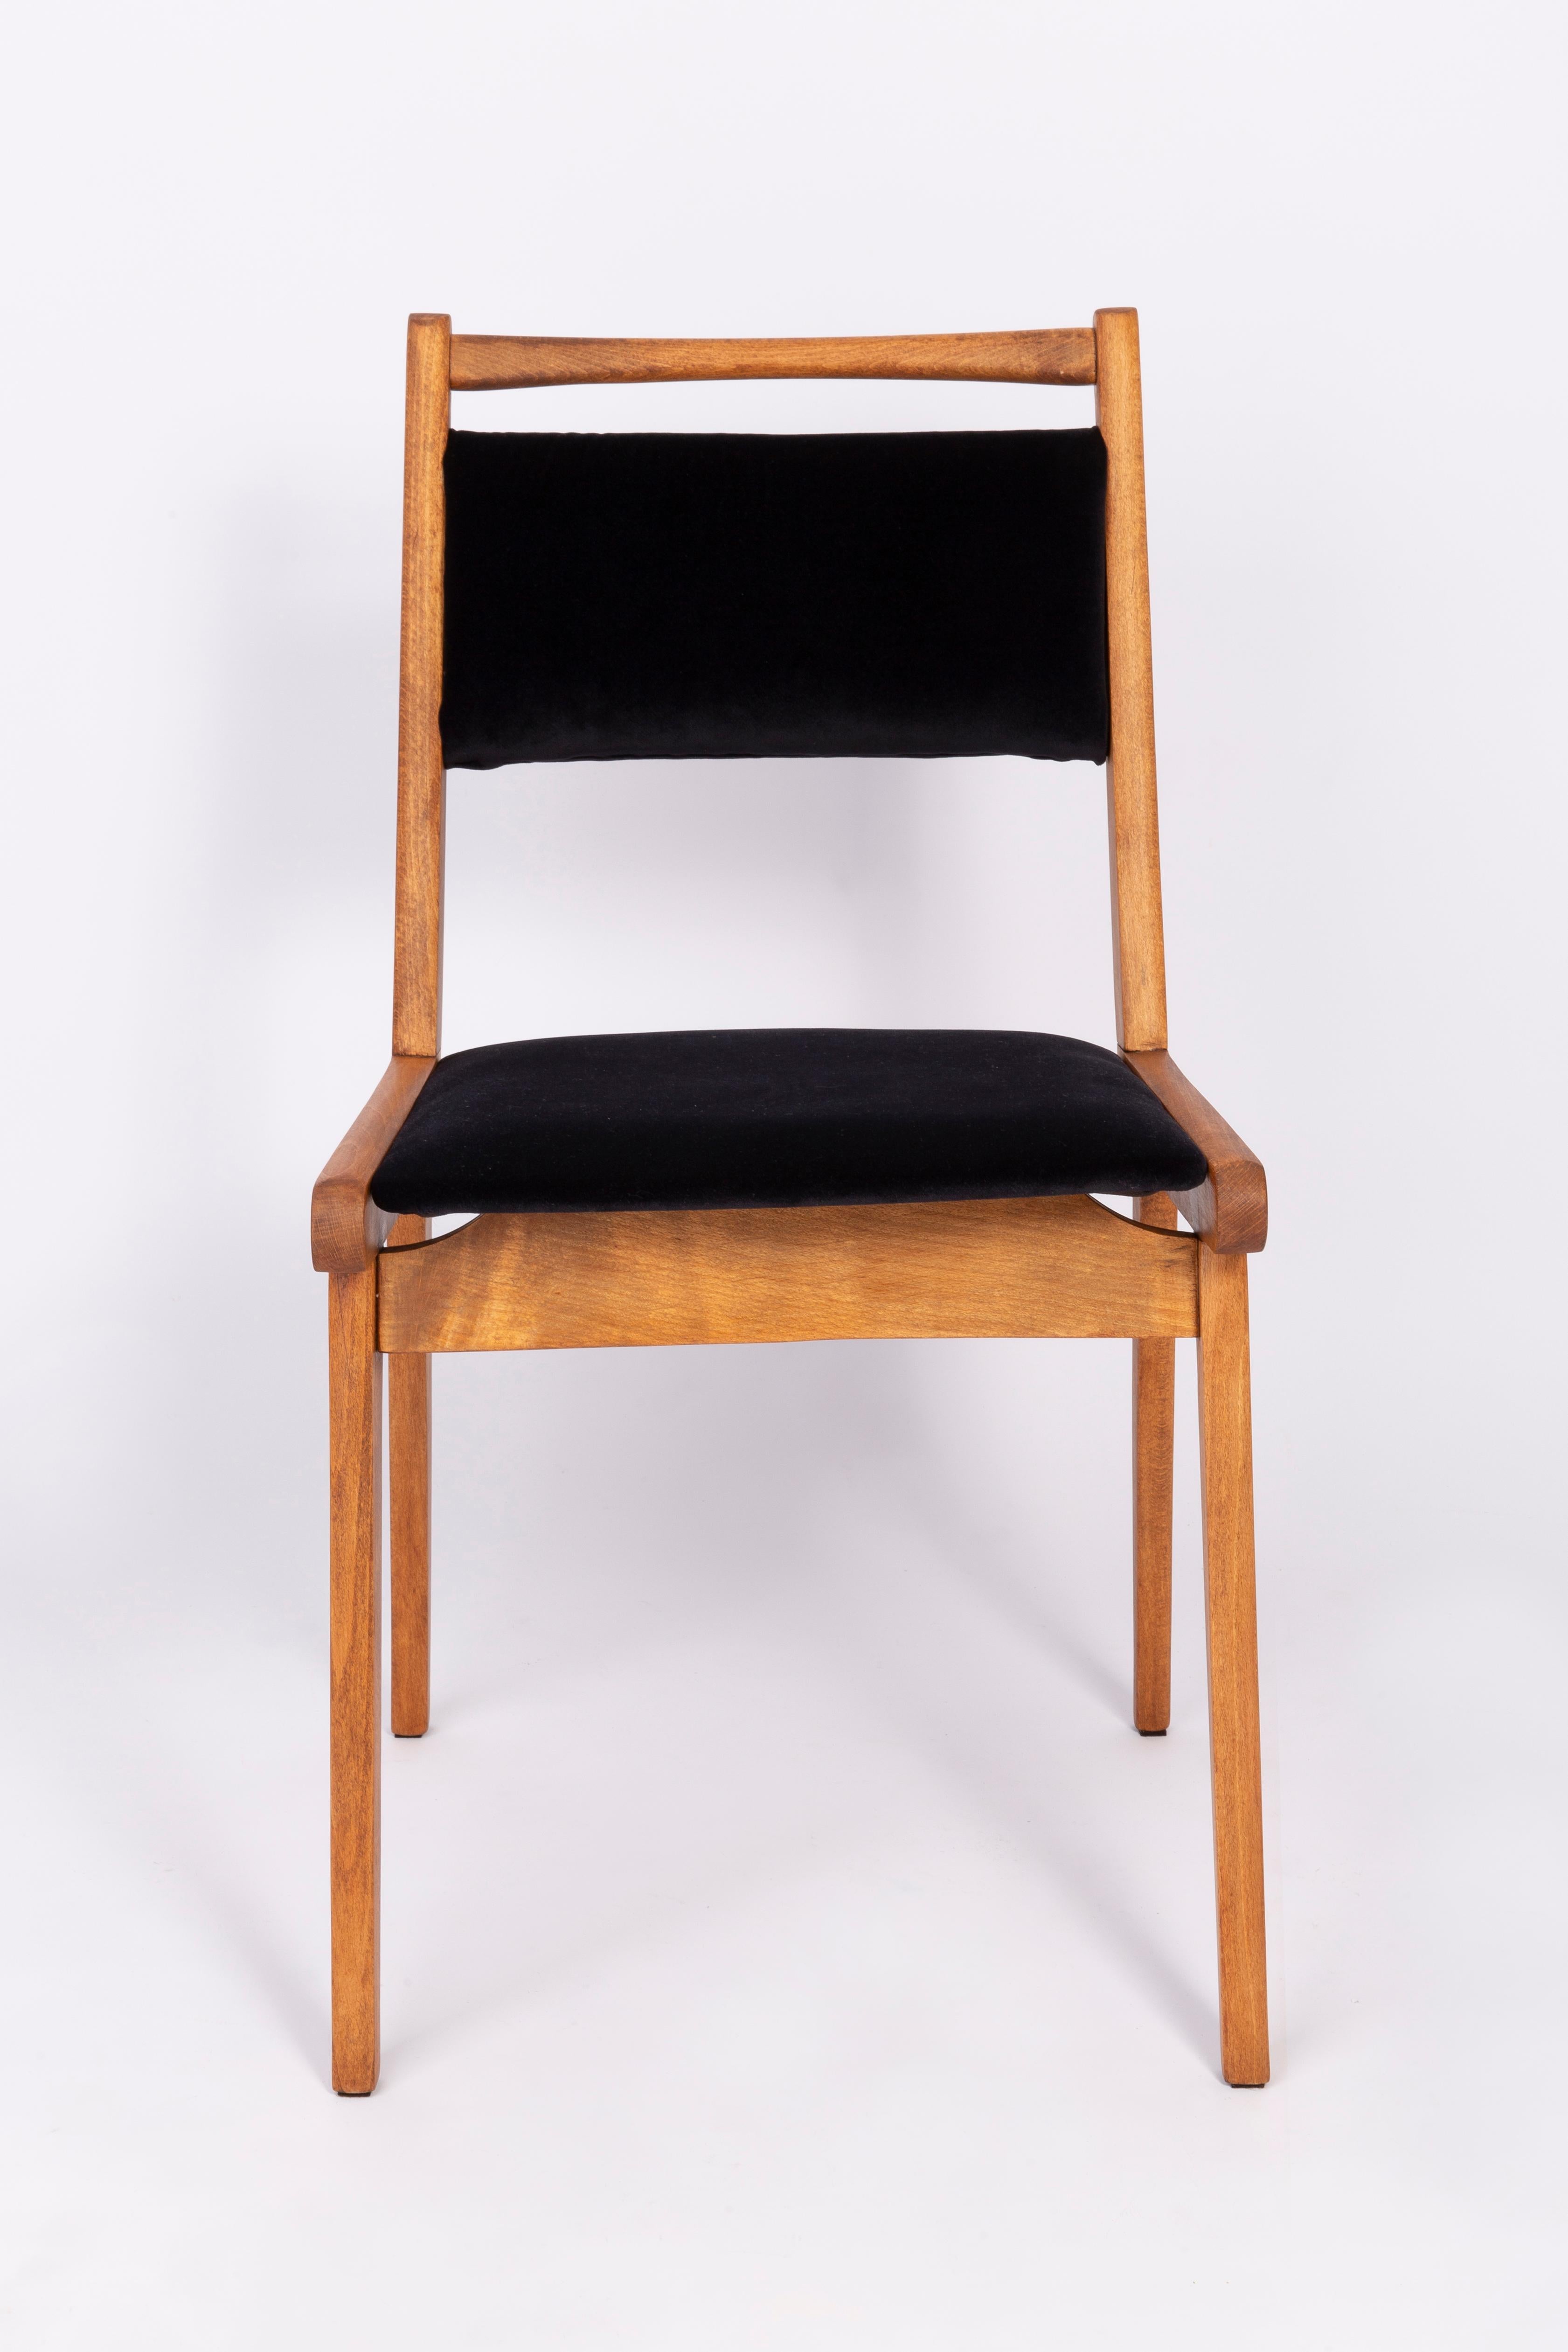 Set of Two 20th Century Black and Red Velvet Chairs, Poland, 1960s For Sale 4